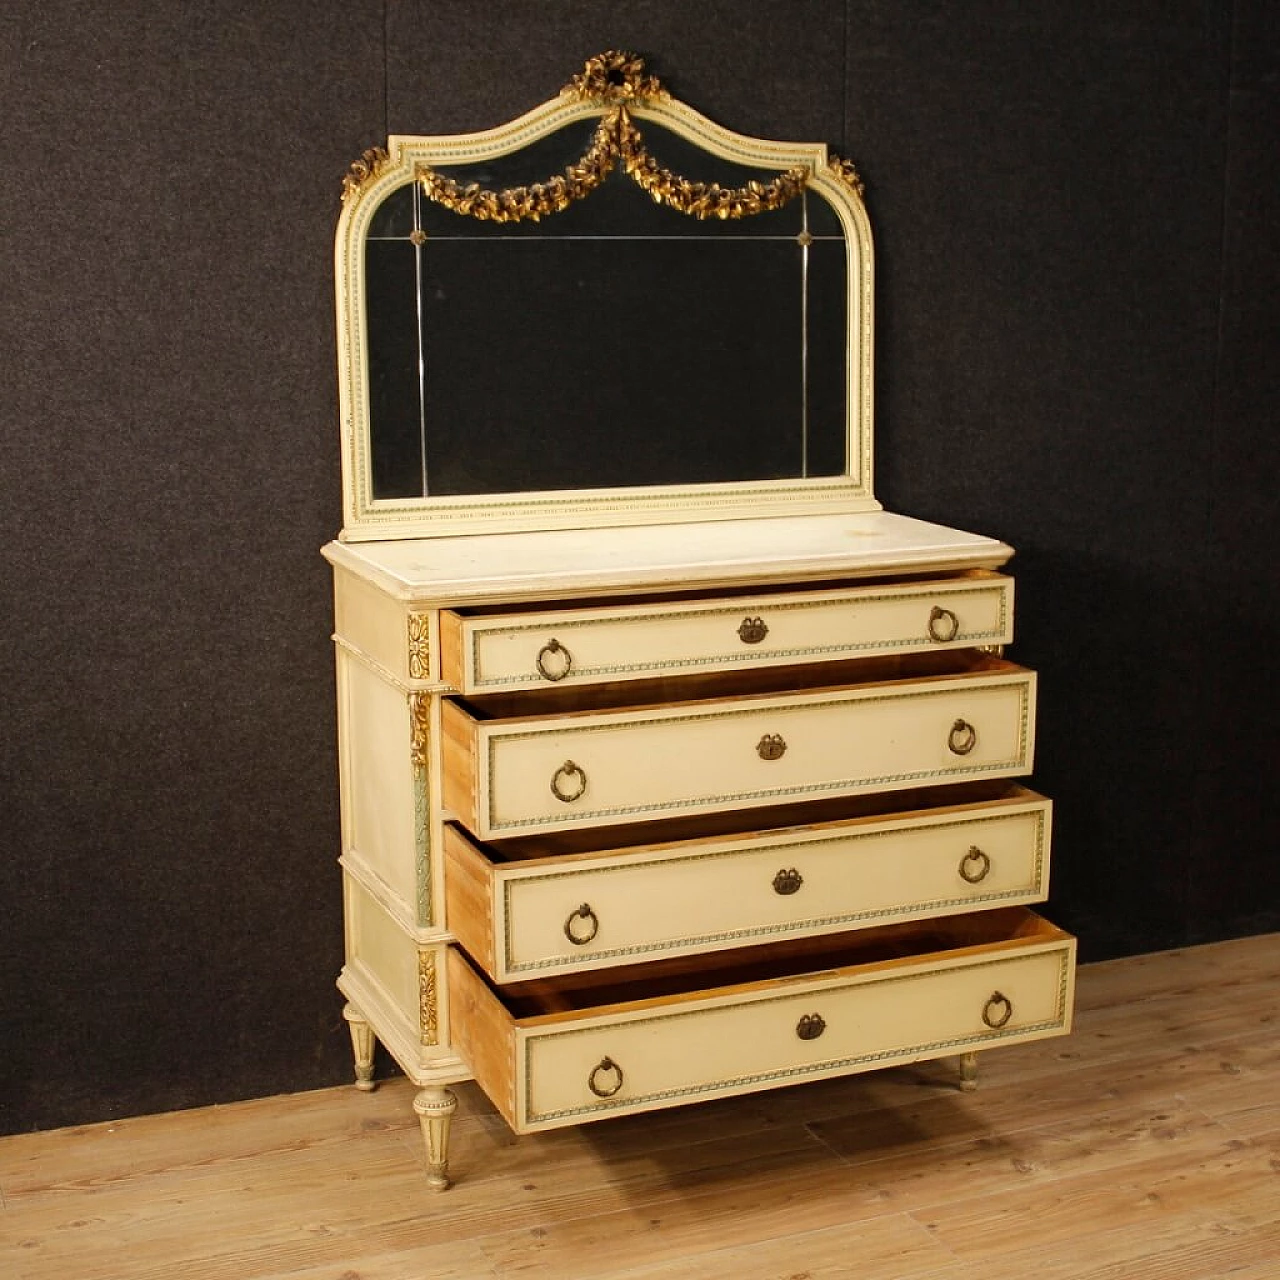 Louis XVI style lacquered and gilded wood dresser with mirror 12